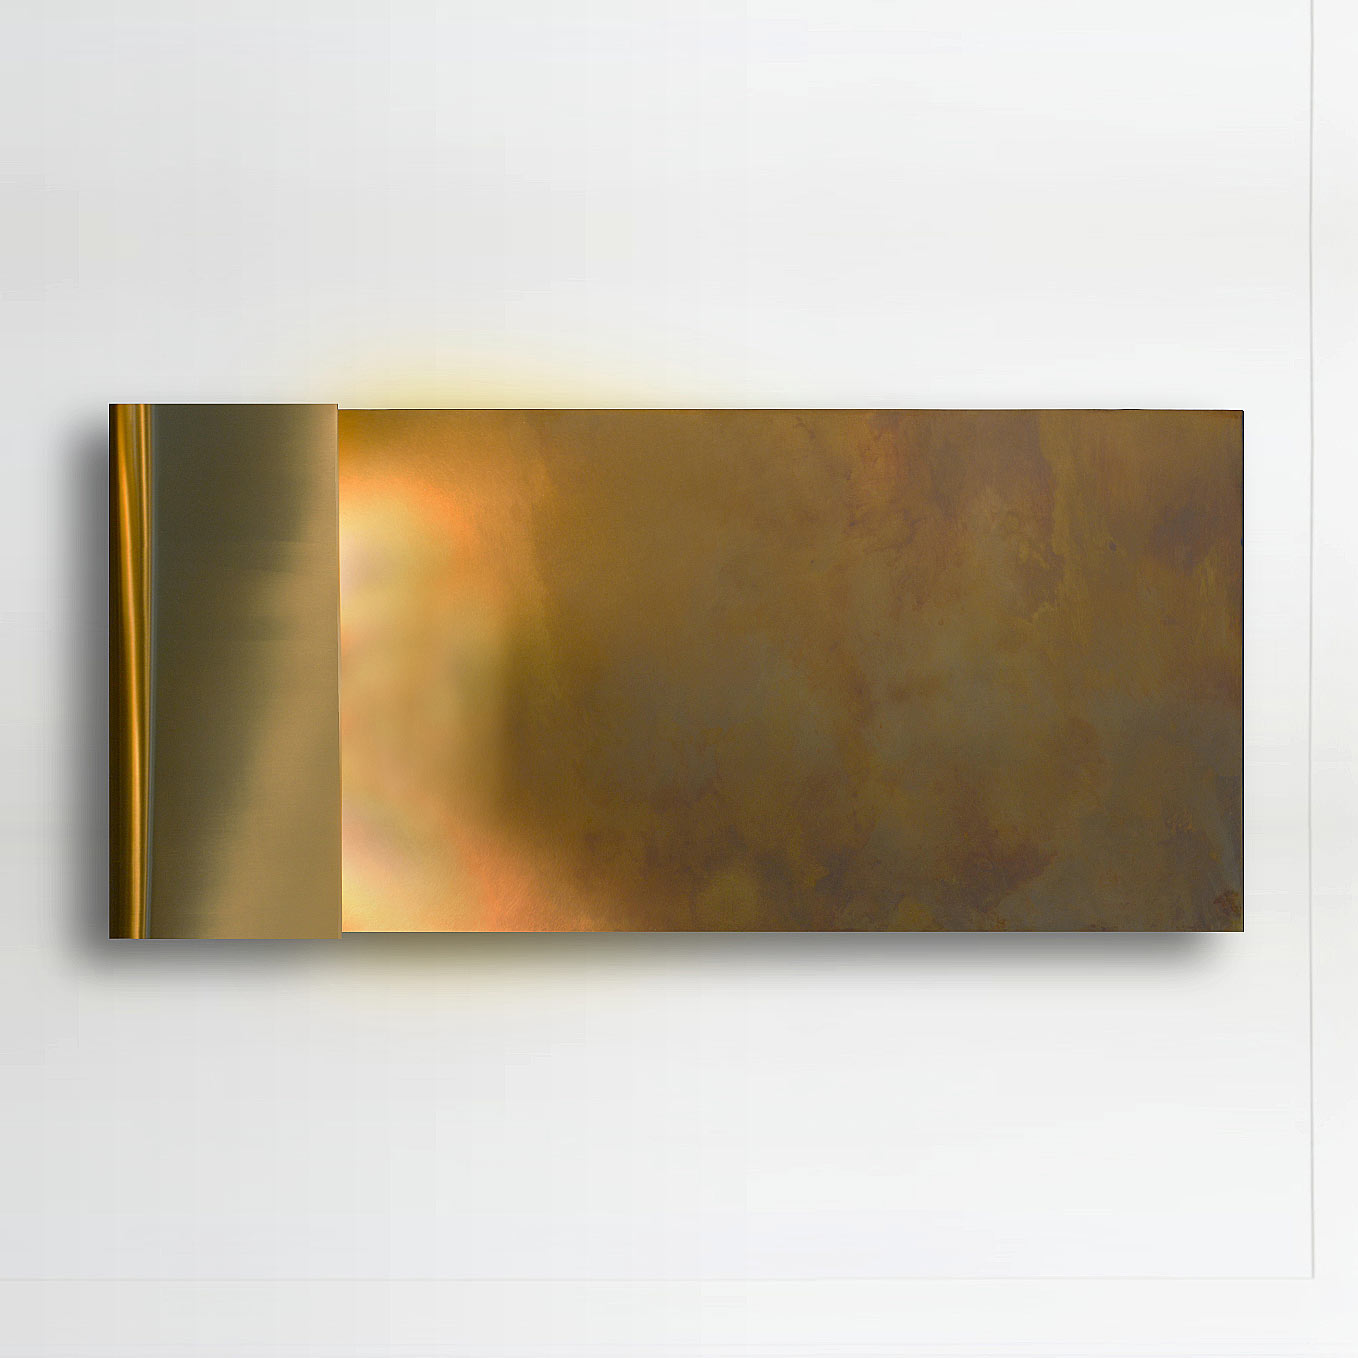 The ARTEM is a brass wall light of the highest quality and supplied by South Charlotte Fine Lighting